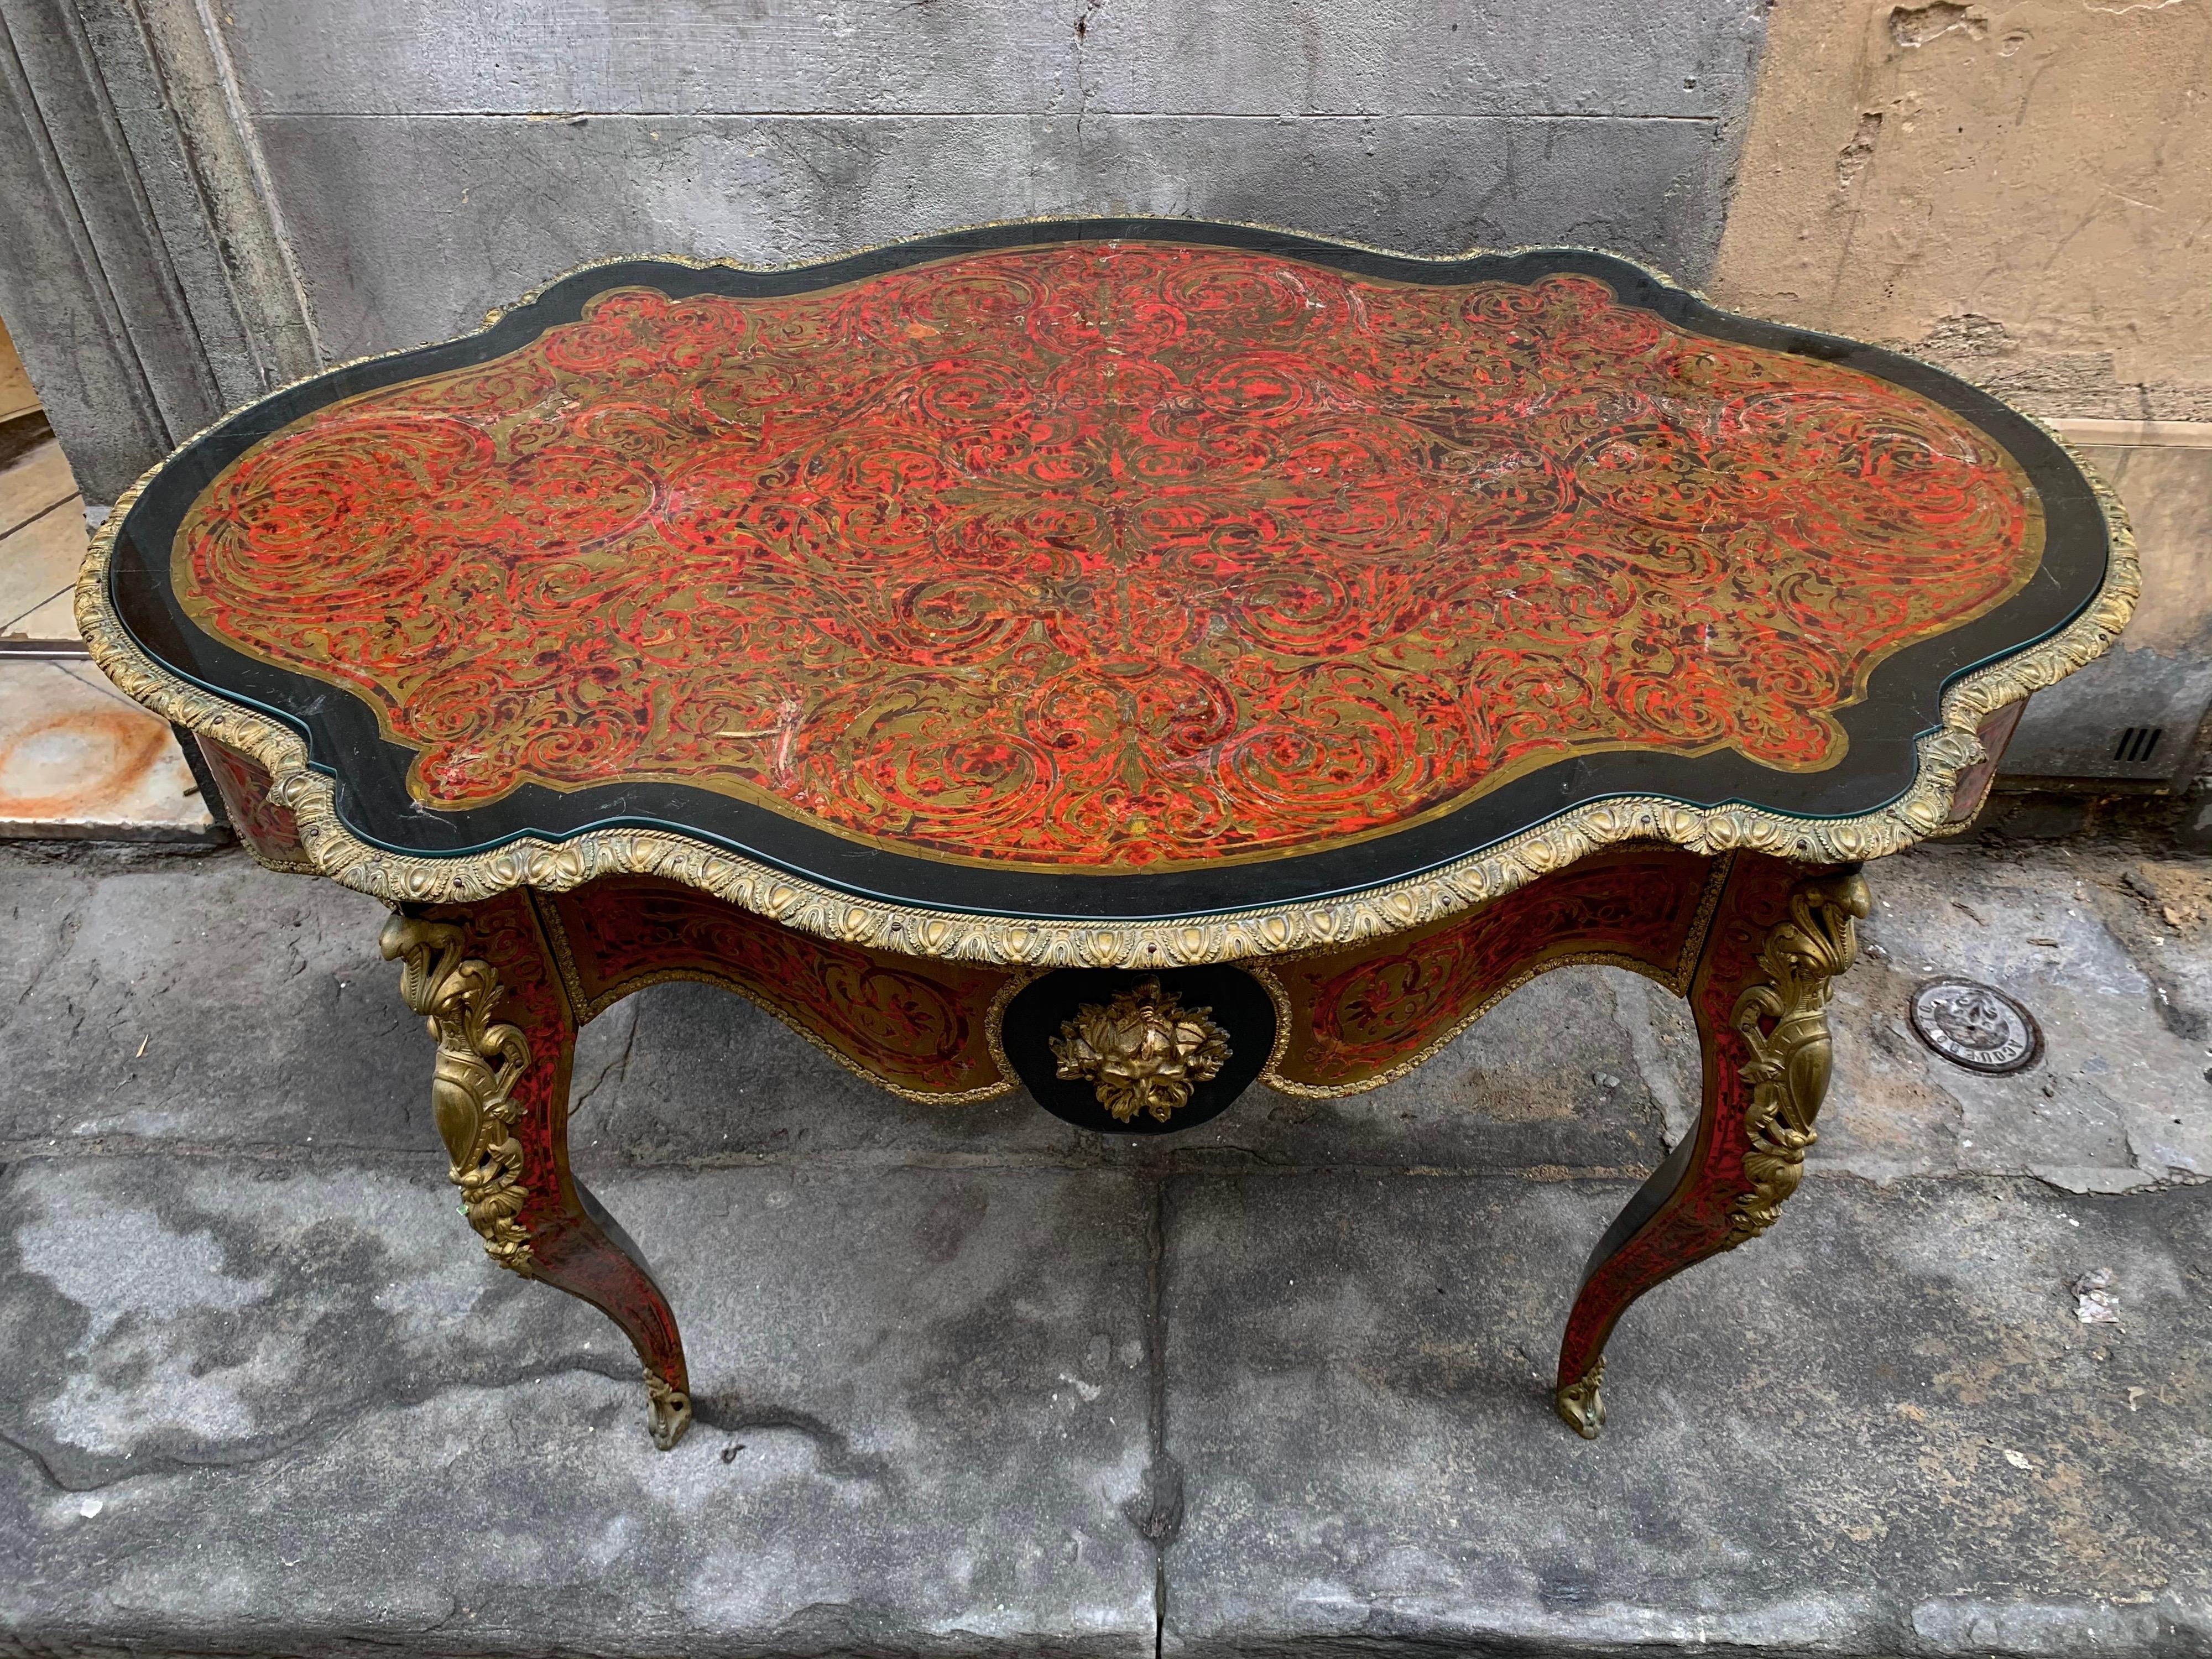 Charles- Boulle style ormolu-mounted tortoiseshell engraved brass and ebony finish desk.
Center or parlor table with serpentine-shaped top, inlaid with foliate brass scrollwork. Red and black painted frame with a central drawer, on shaped cabriole